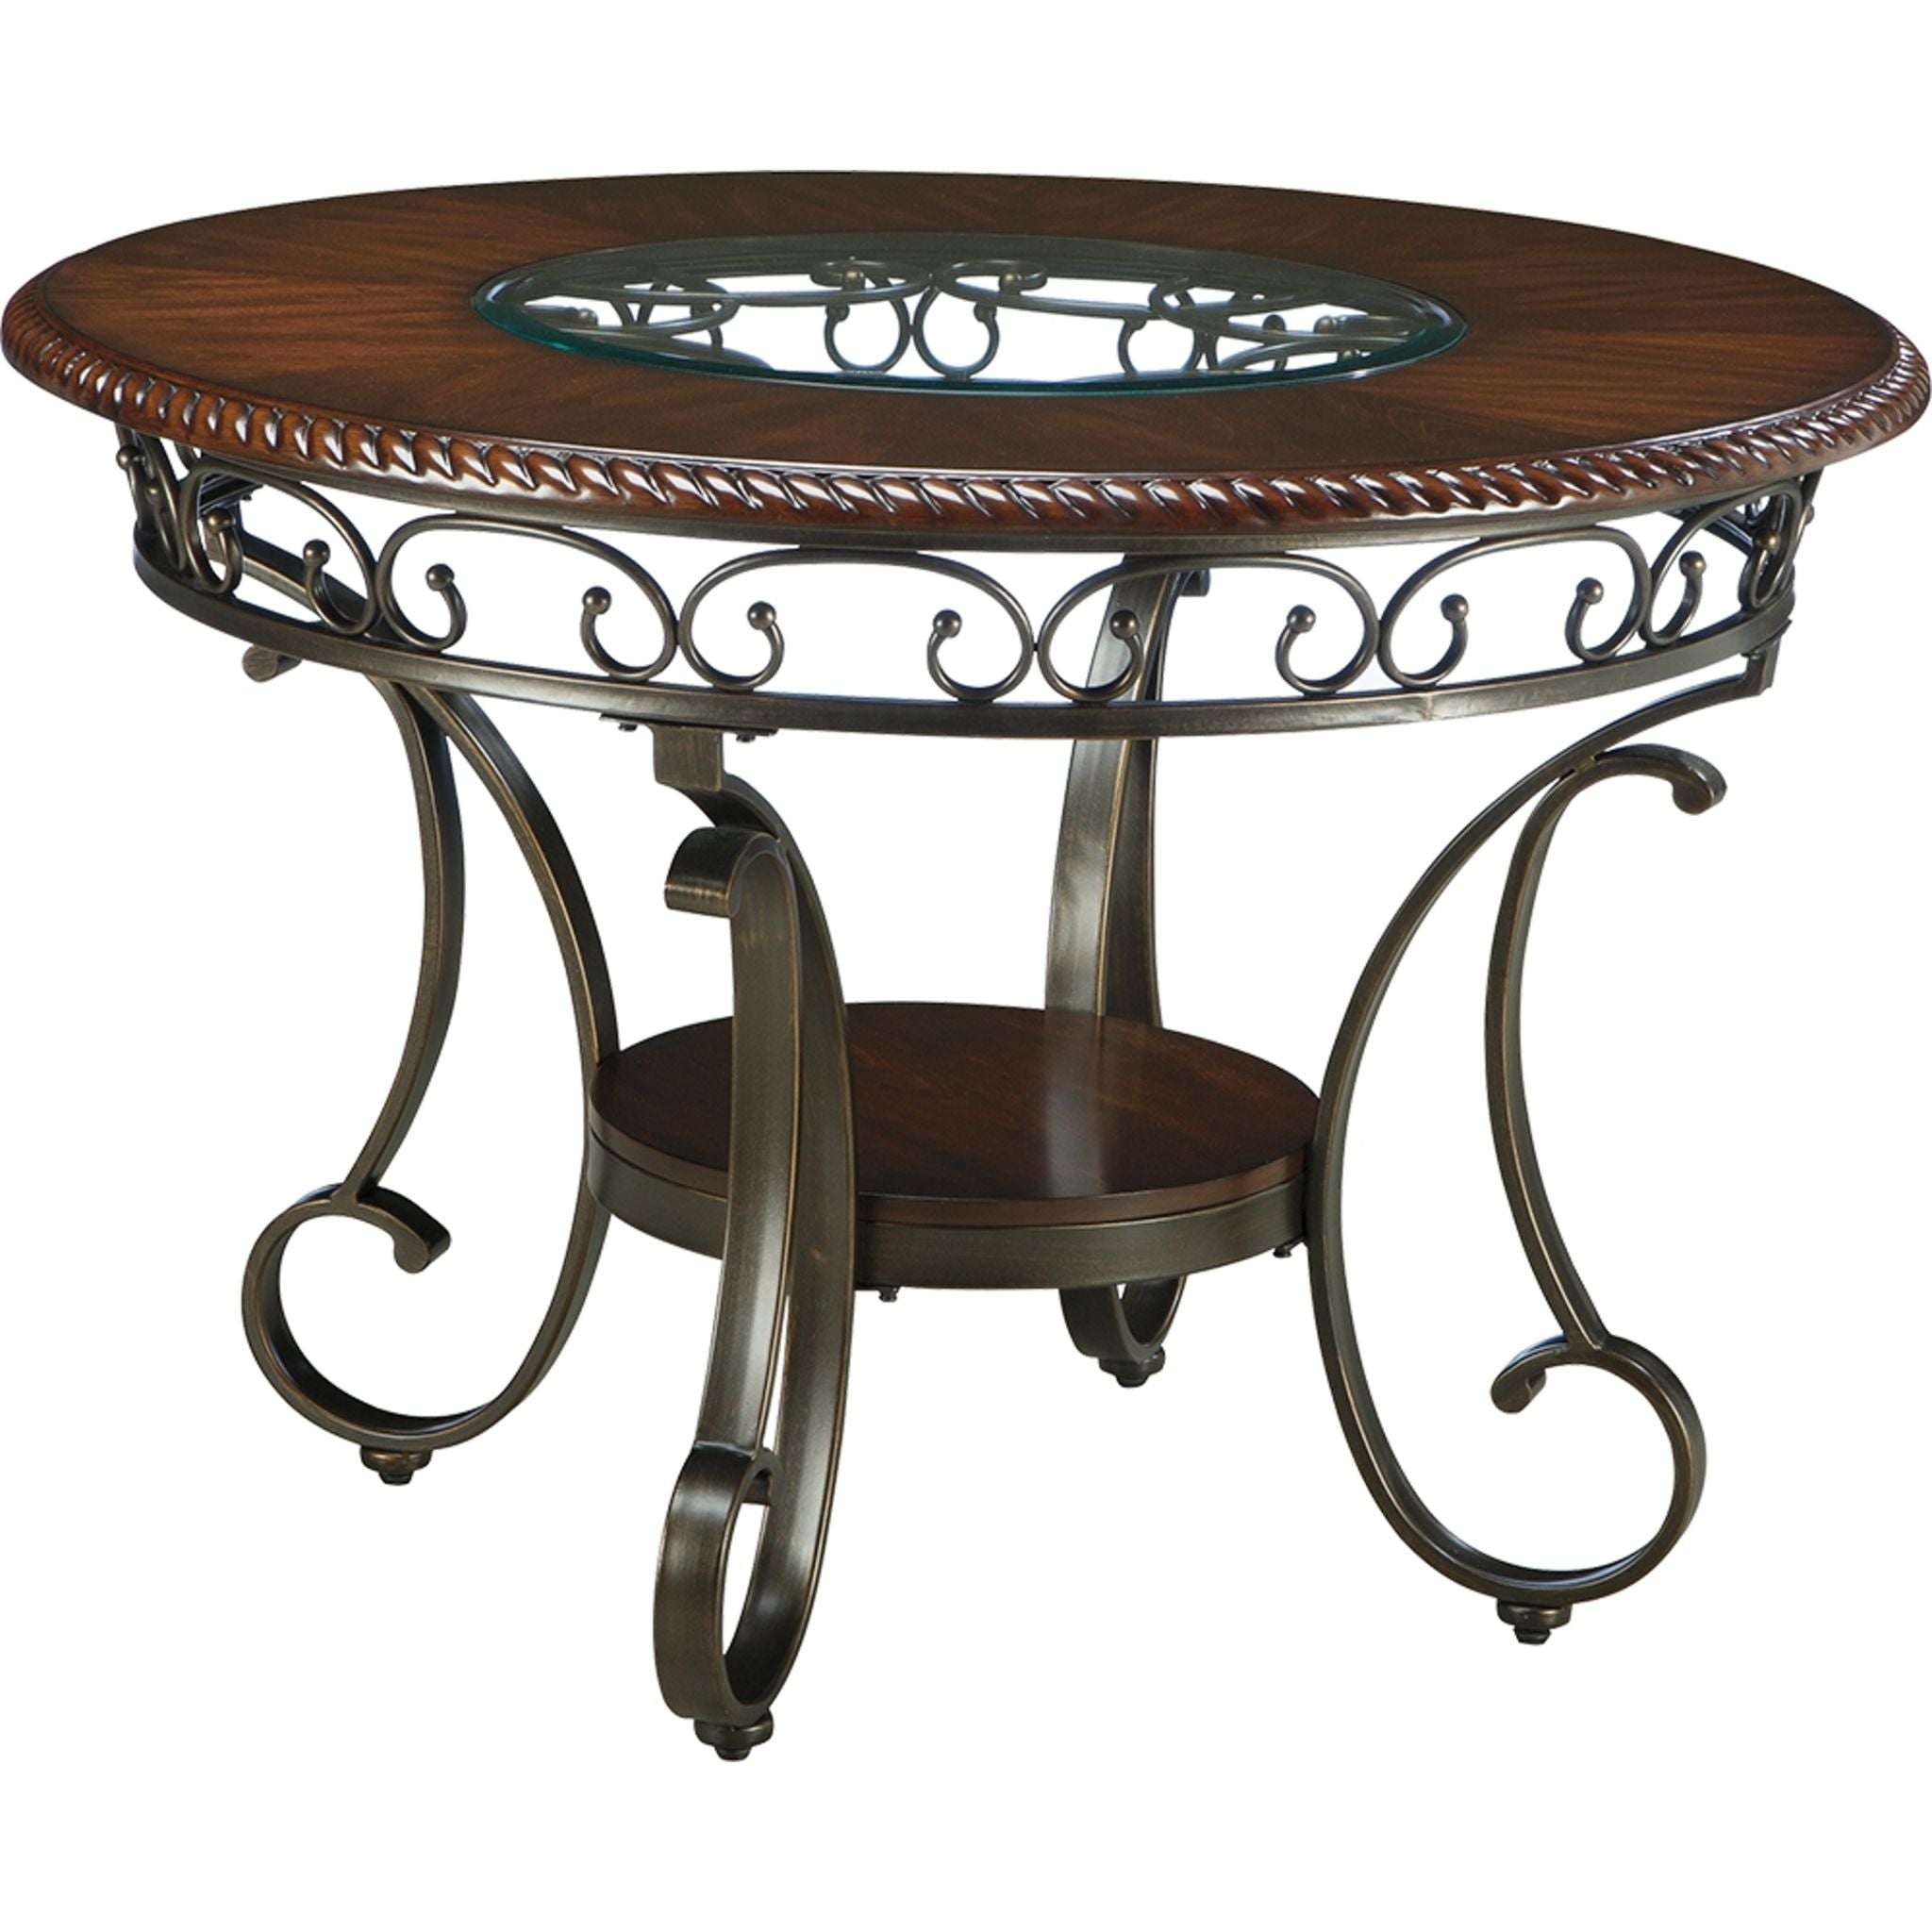 Round Glass Coffee Tables At Ashley Furniture : Marion Coffee Table